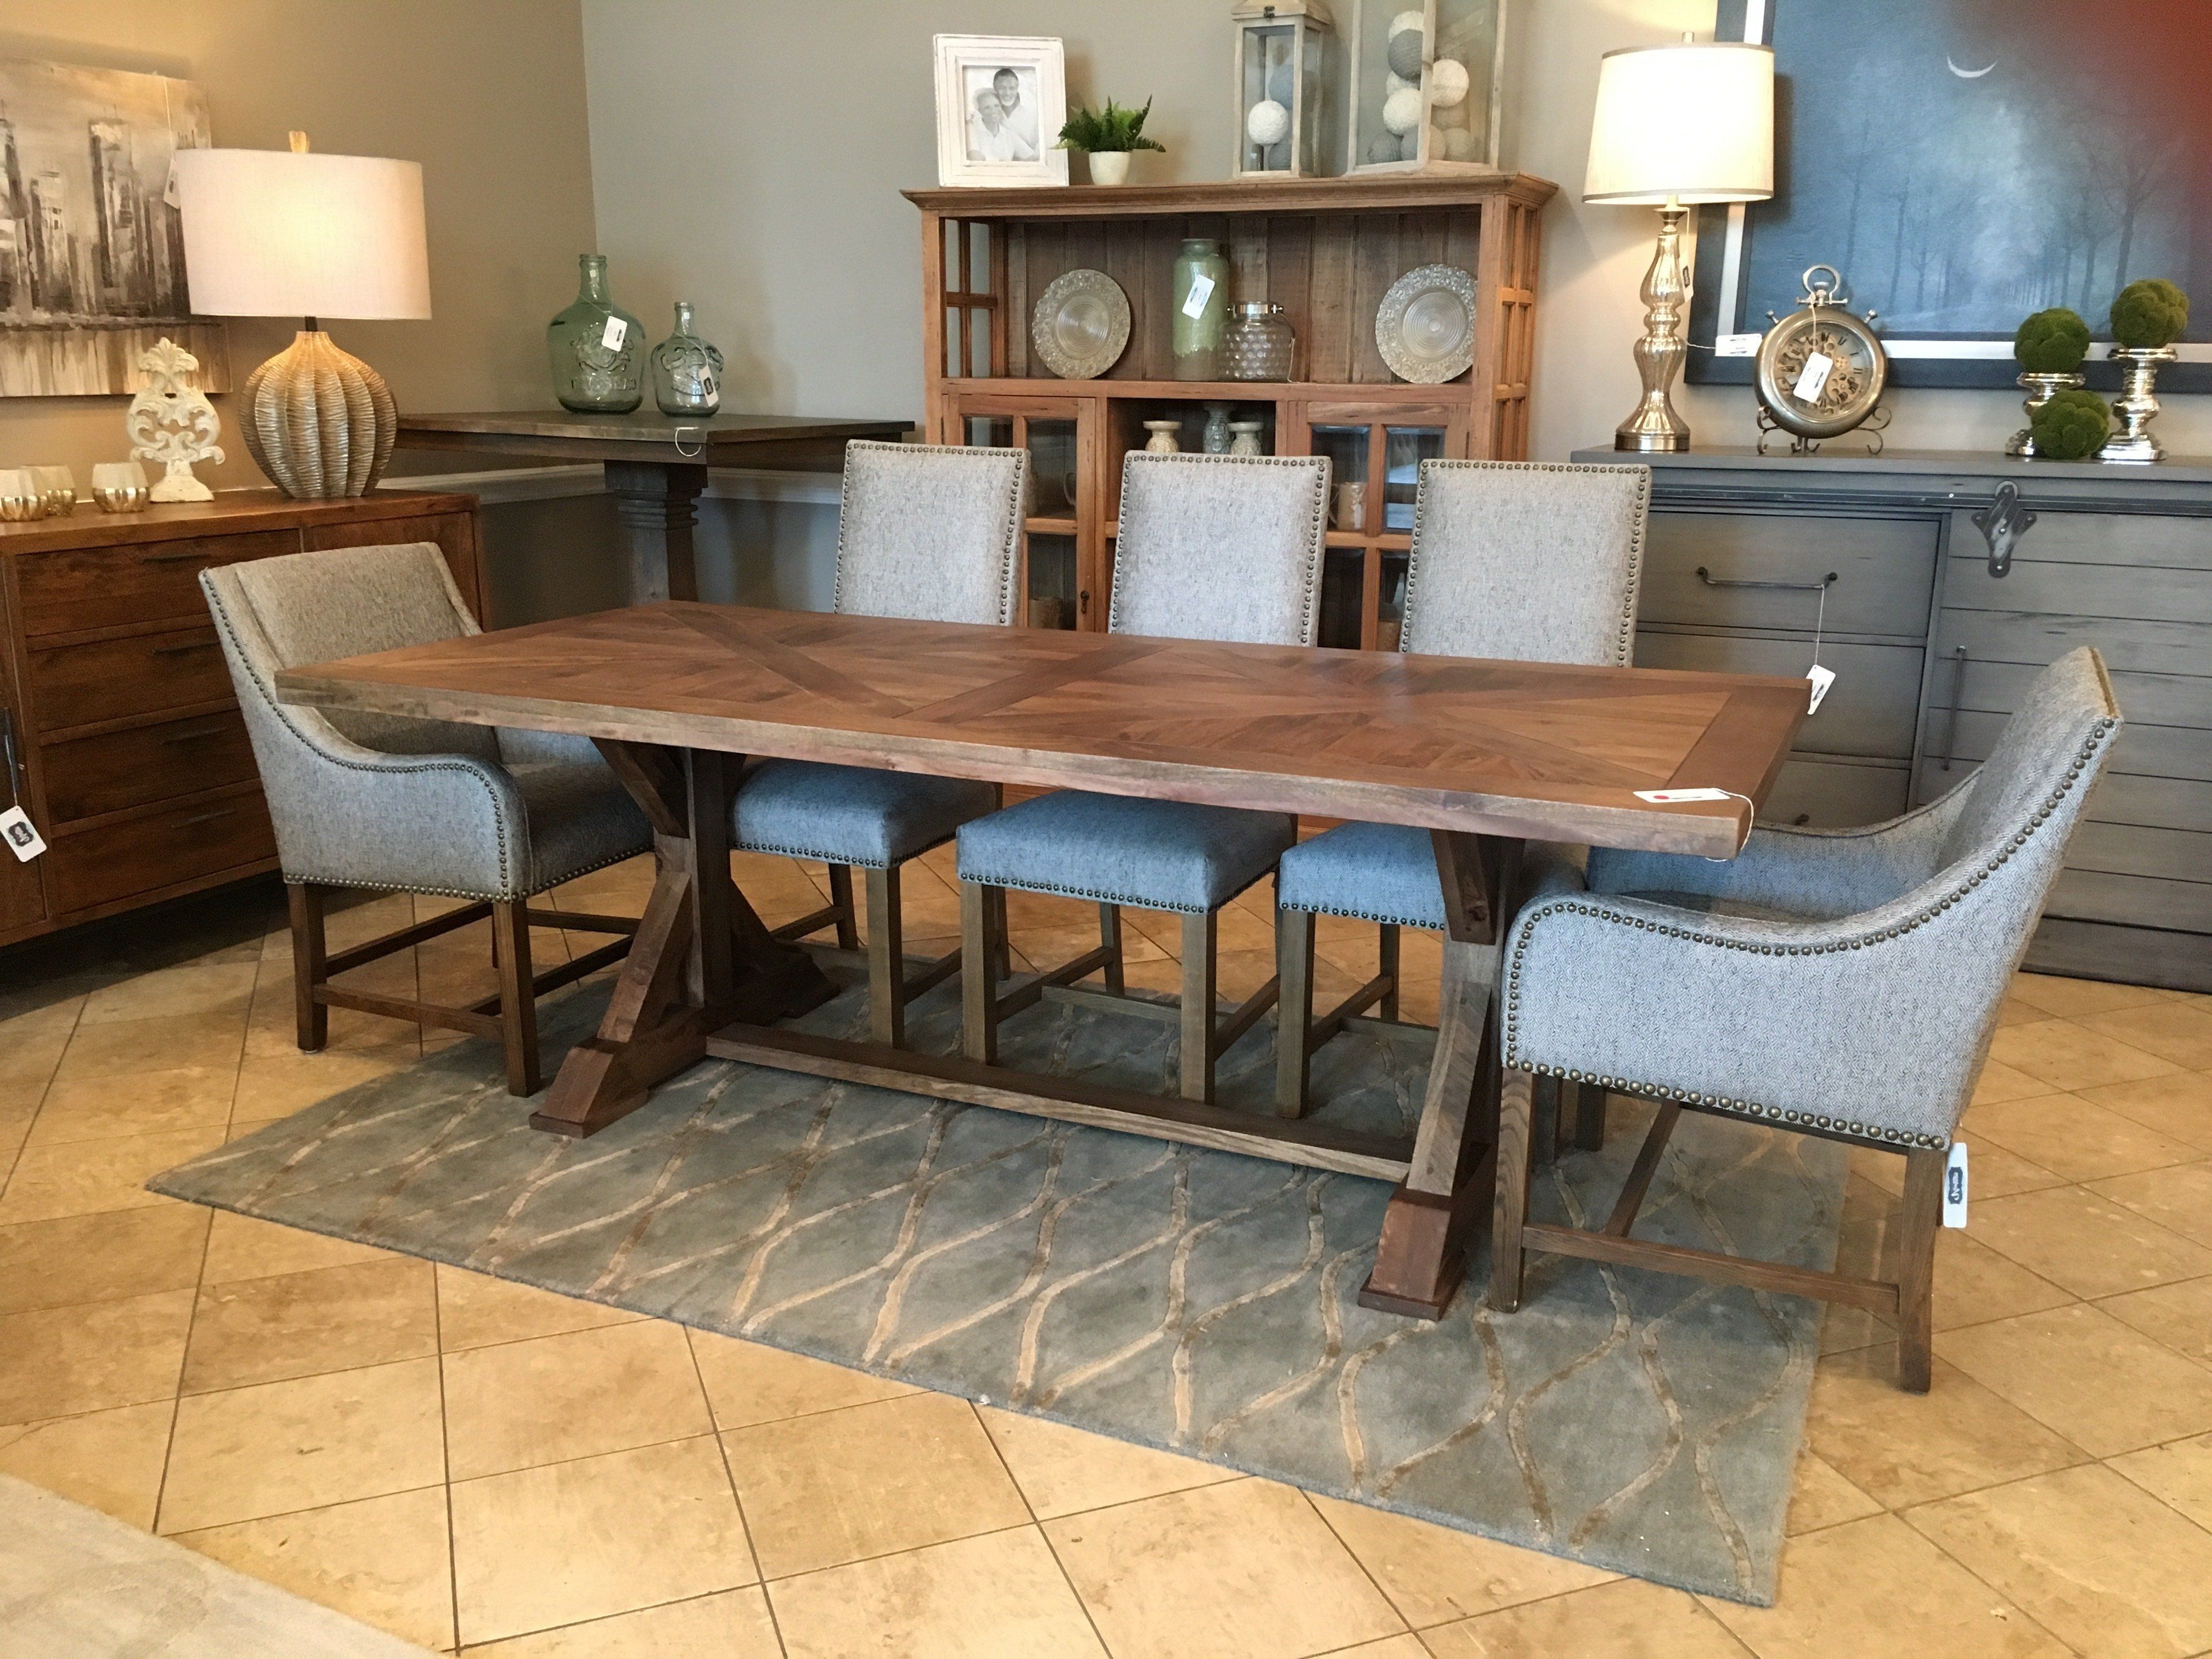 Magnolia Home Shop Floor Dining Tables With Iron Trestle Inside Favorite Magnolia Home Trestle Dining Table Inspirational Asheville  (View 21 of 25)